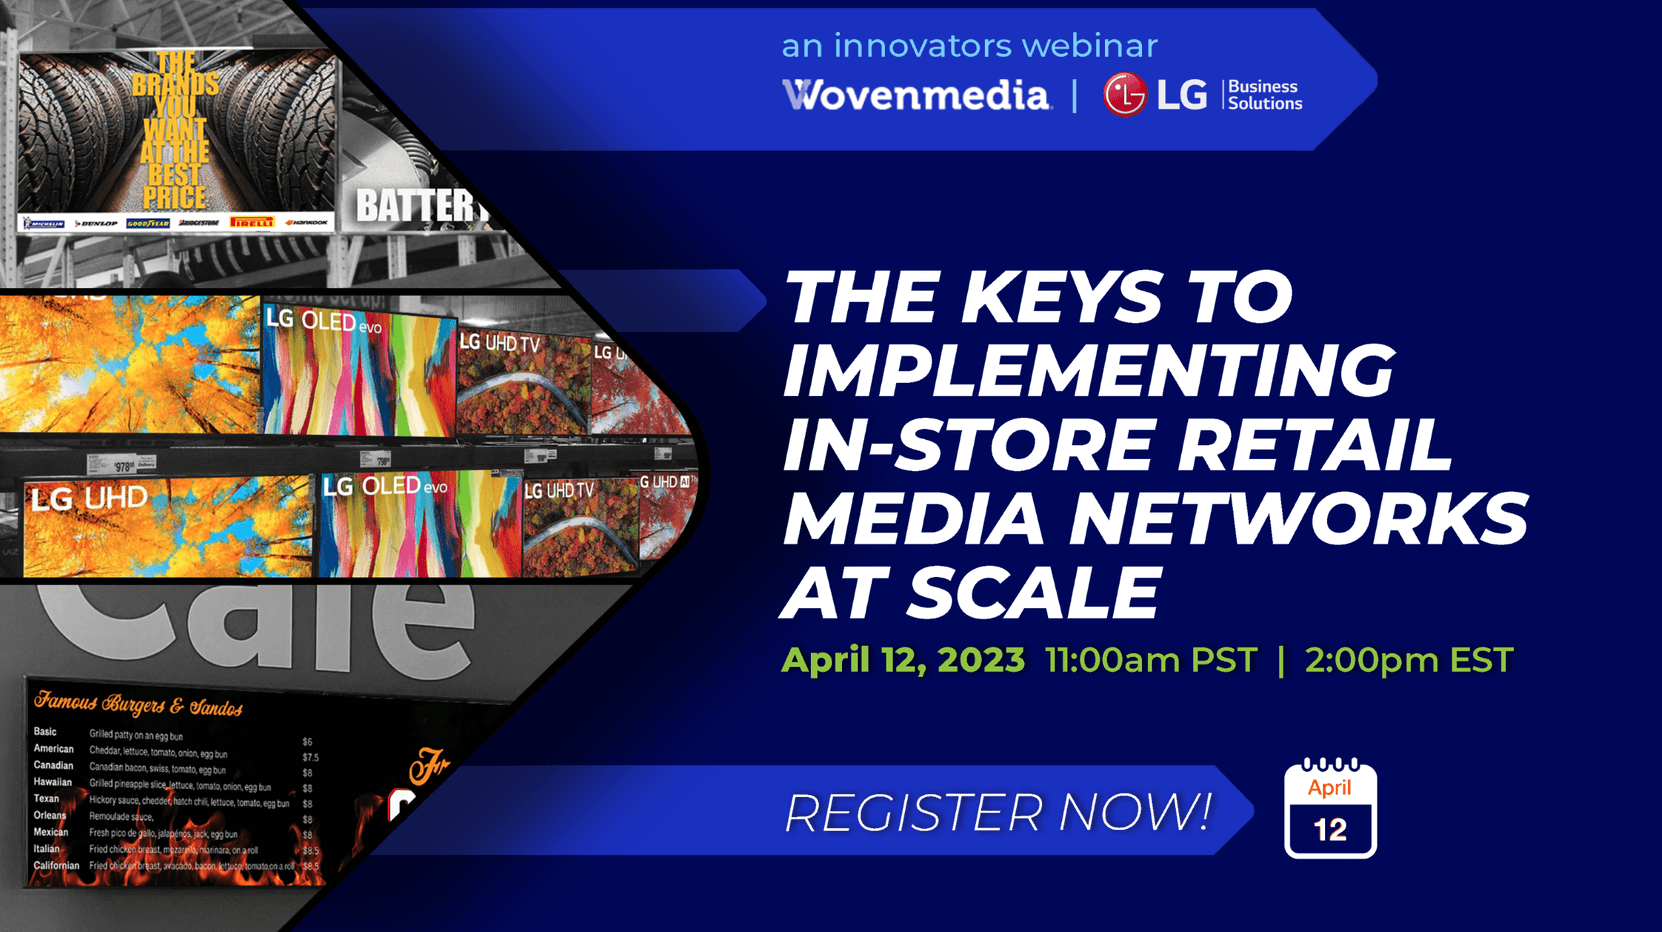 The keys to implementing in-store retial media networks at scale. Webinar hosted by Wovenmedia and LG Business solutions. The left side image shows different screens and content.